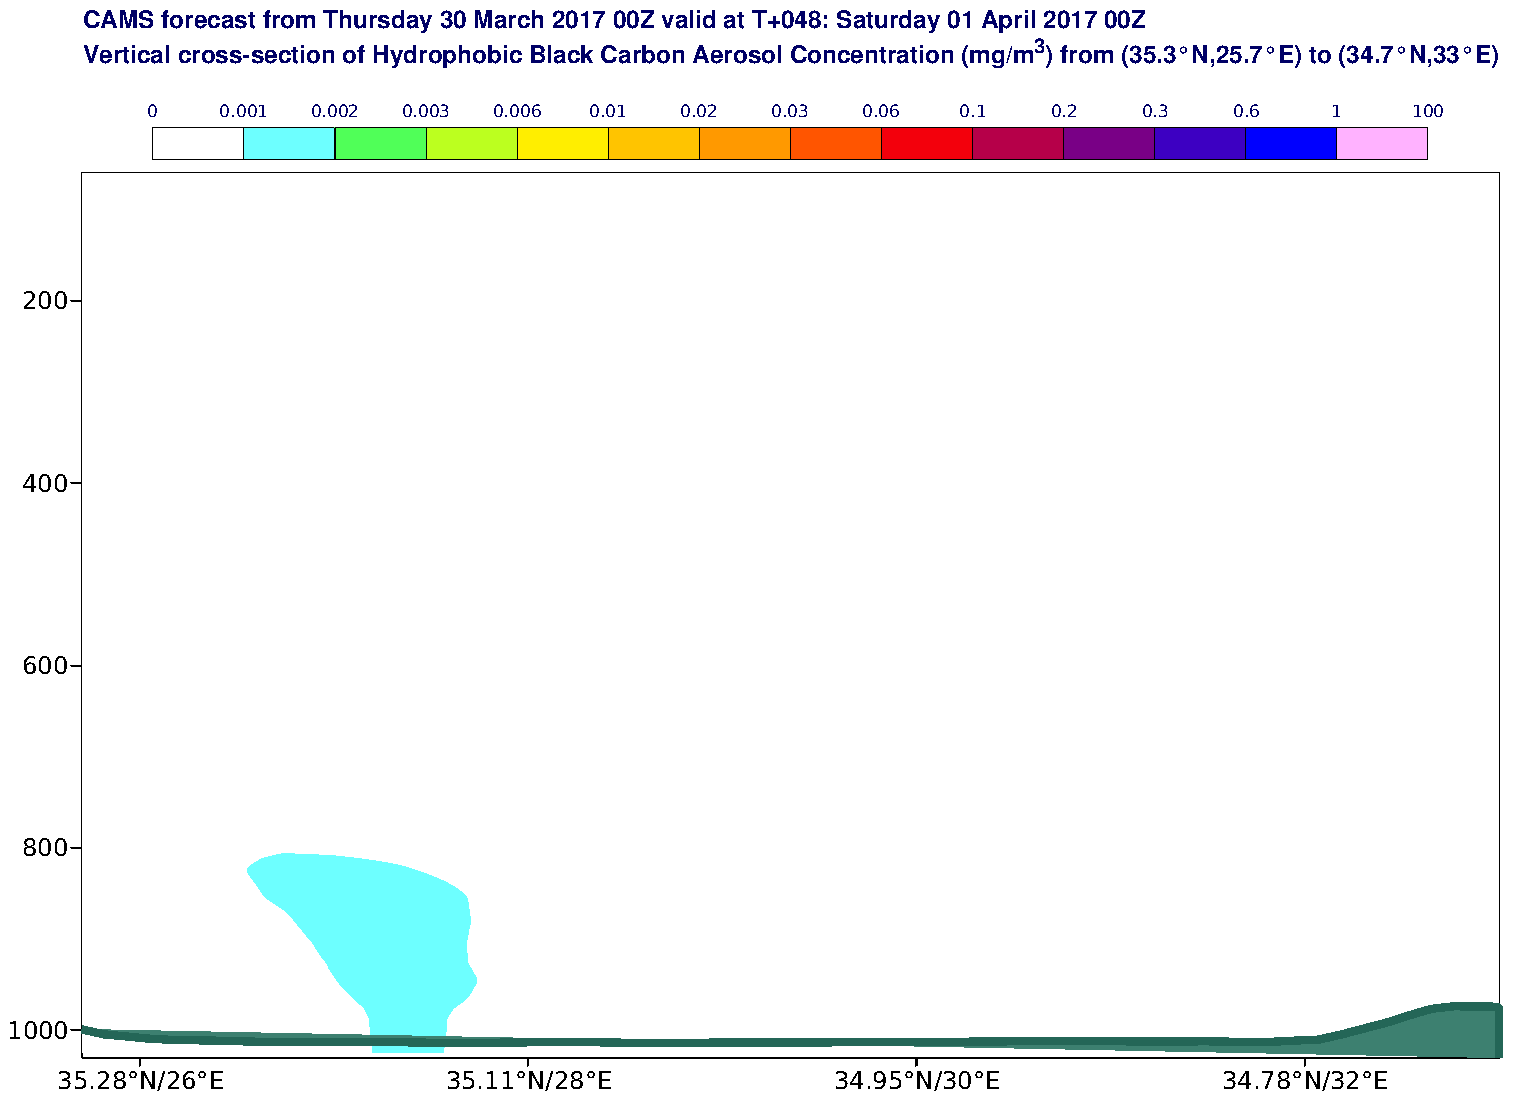 Vertical cross-section of Hydrophobic Black Carbon Aerosol Concentration (mg/m3) valid at T48 - 2017-04-01 00:00